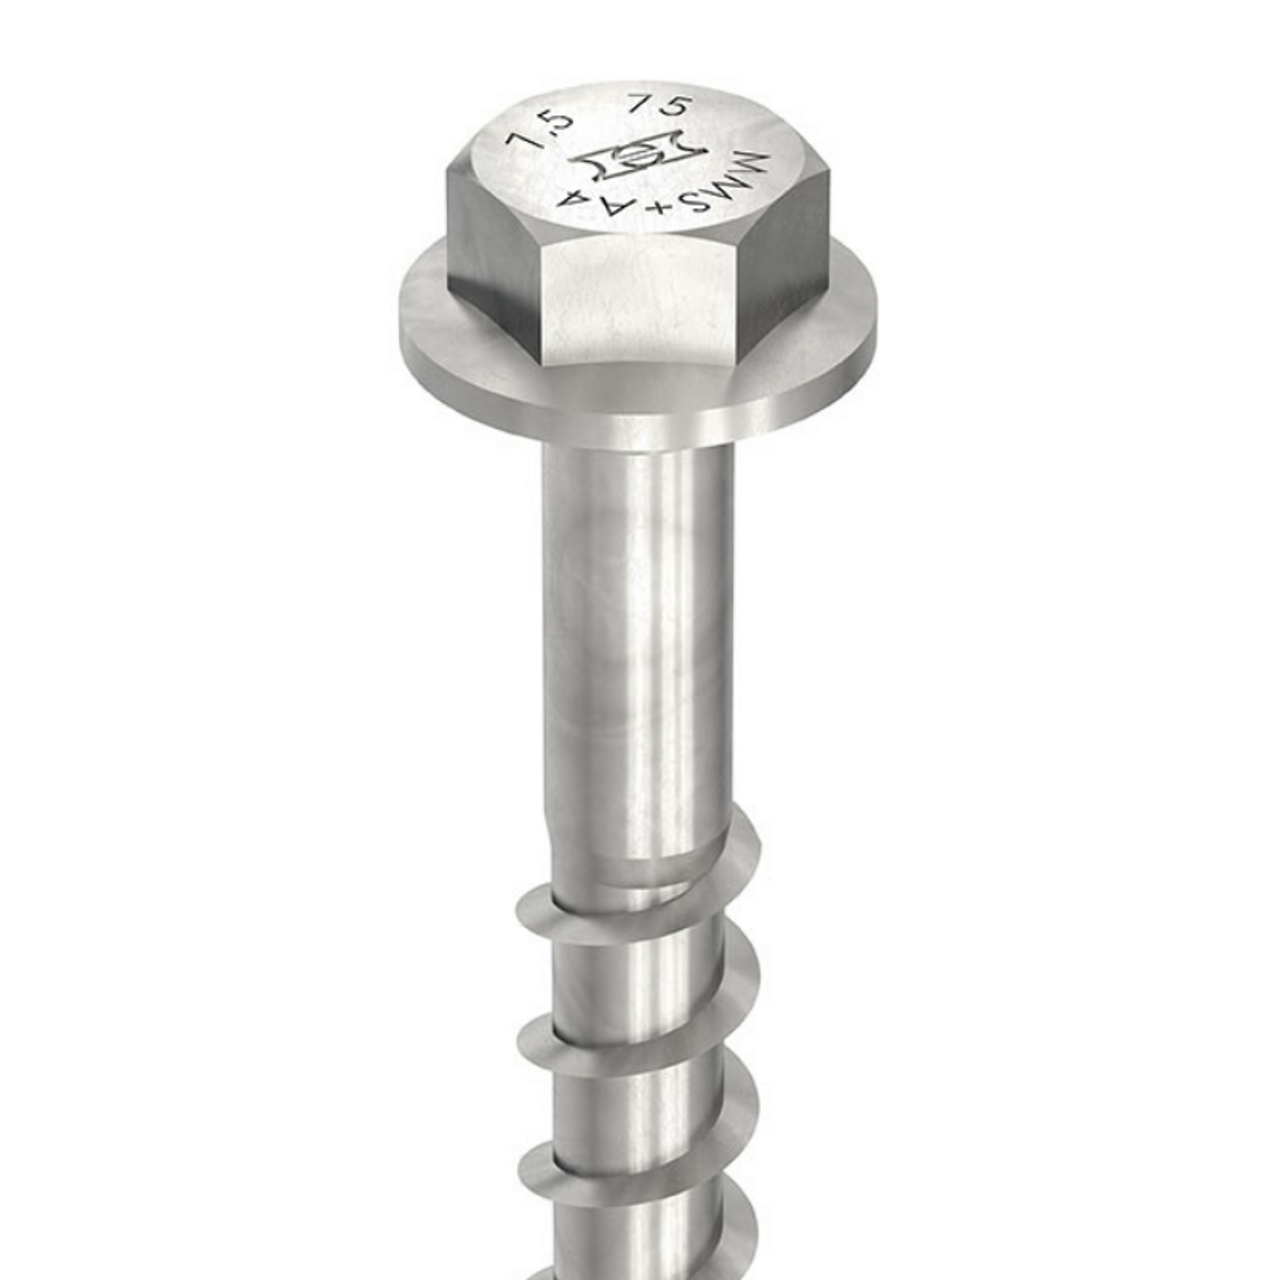 HECO Hexagon Head Screw Anchor HP Coated with SW-15 for the Construction Industry and Installers in Hobart, Sydney and Brisbane